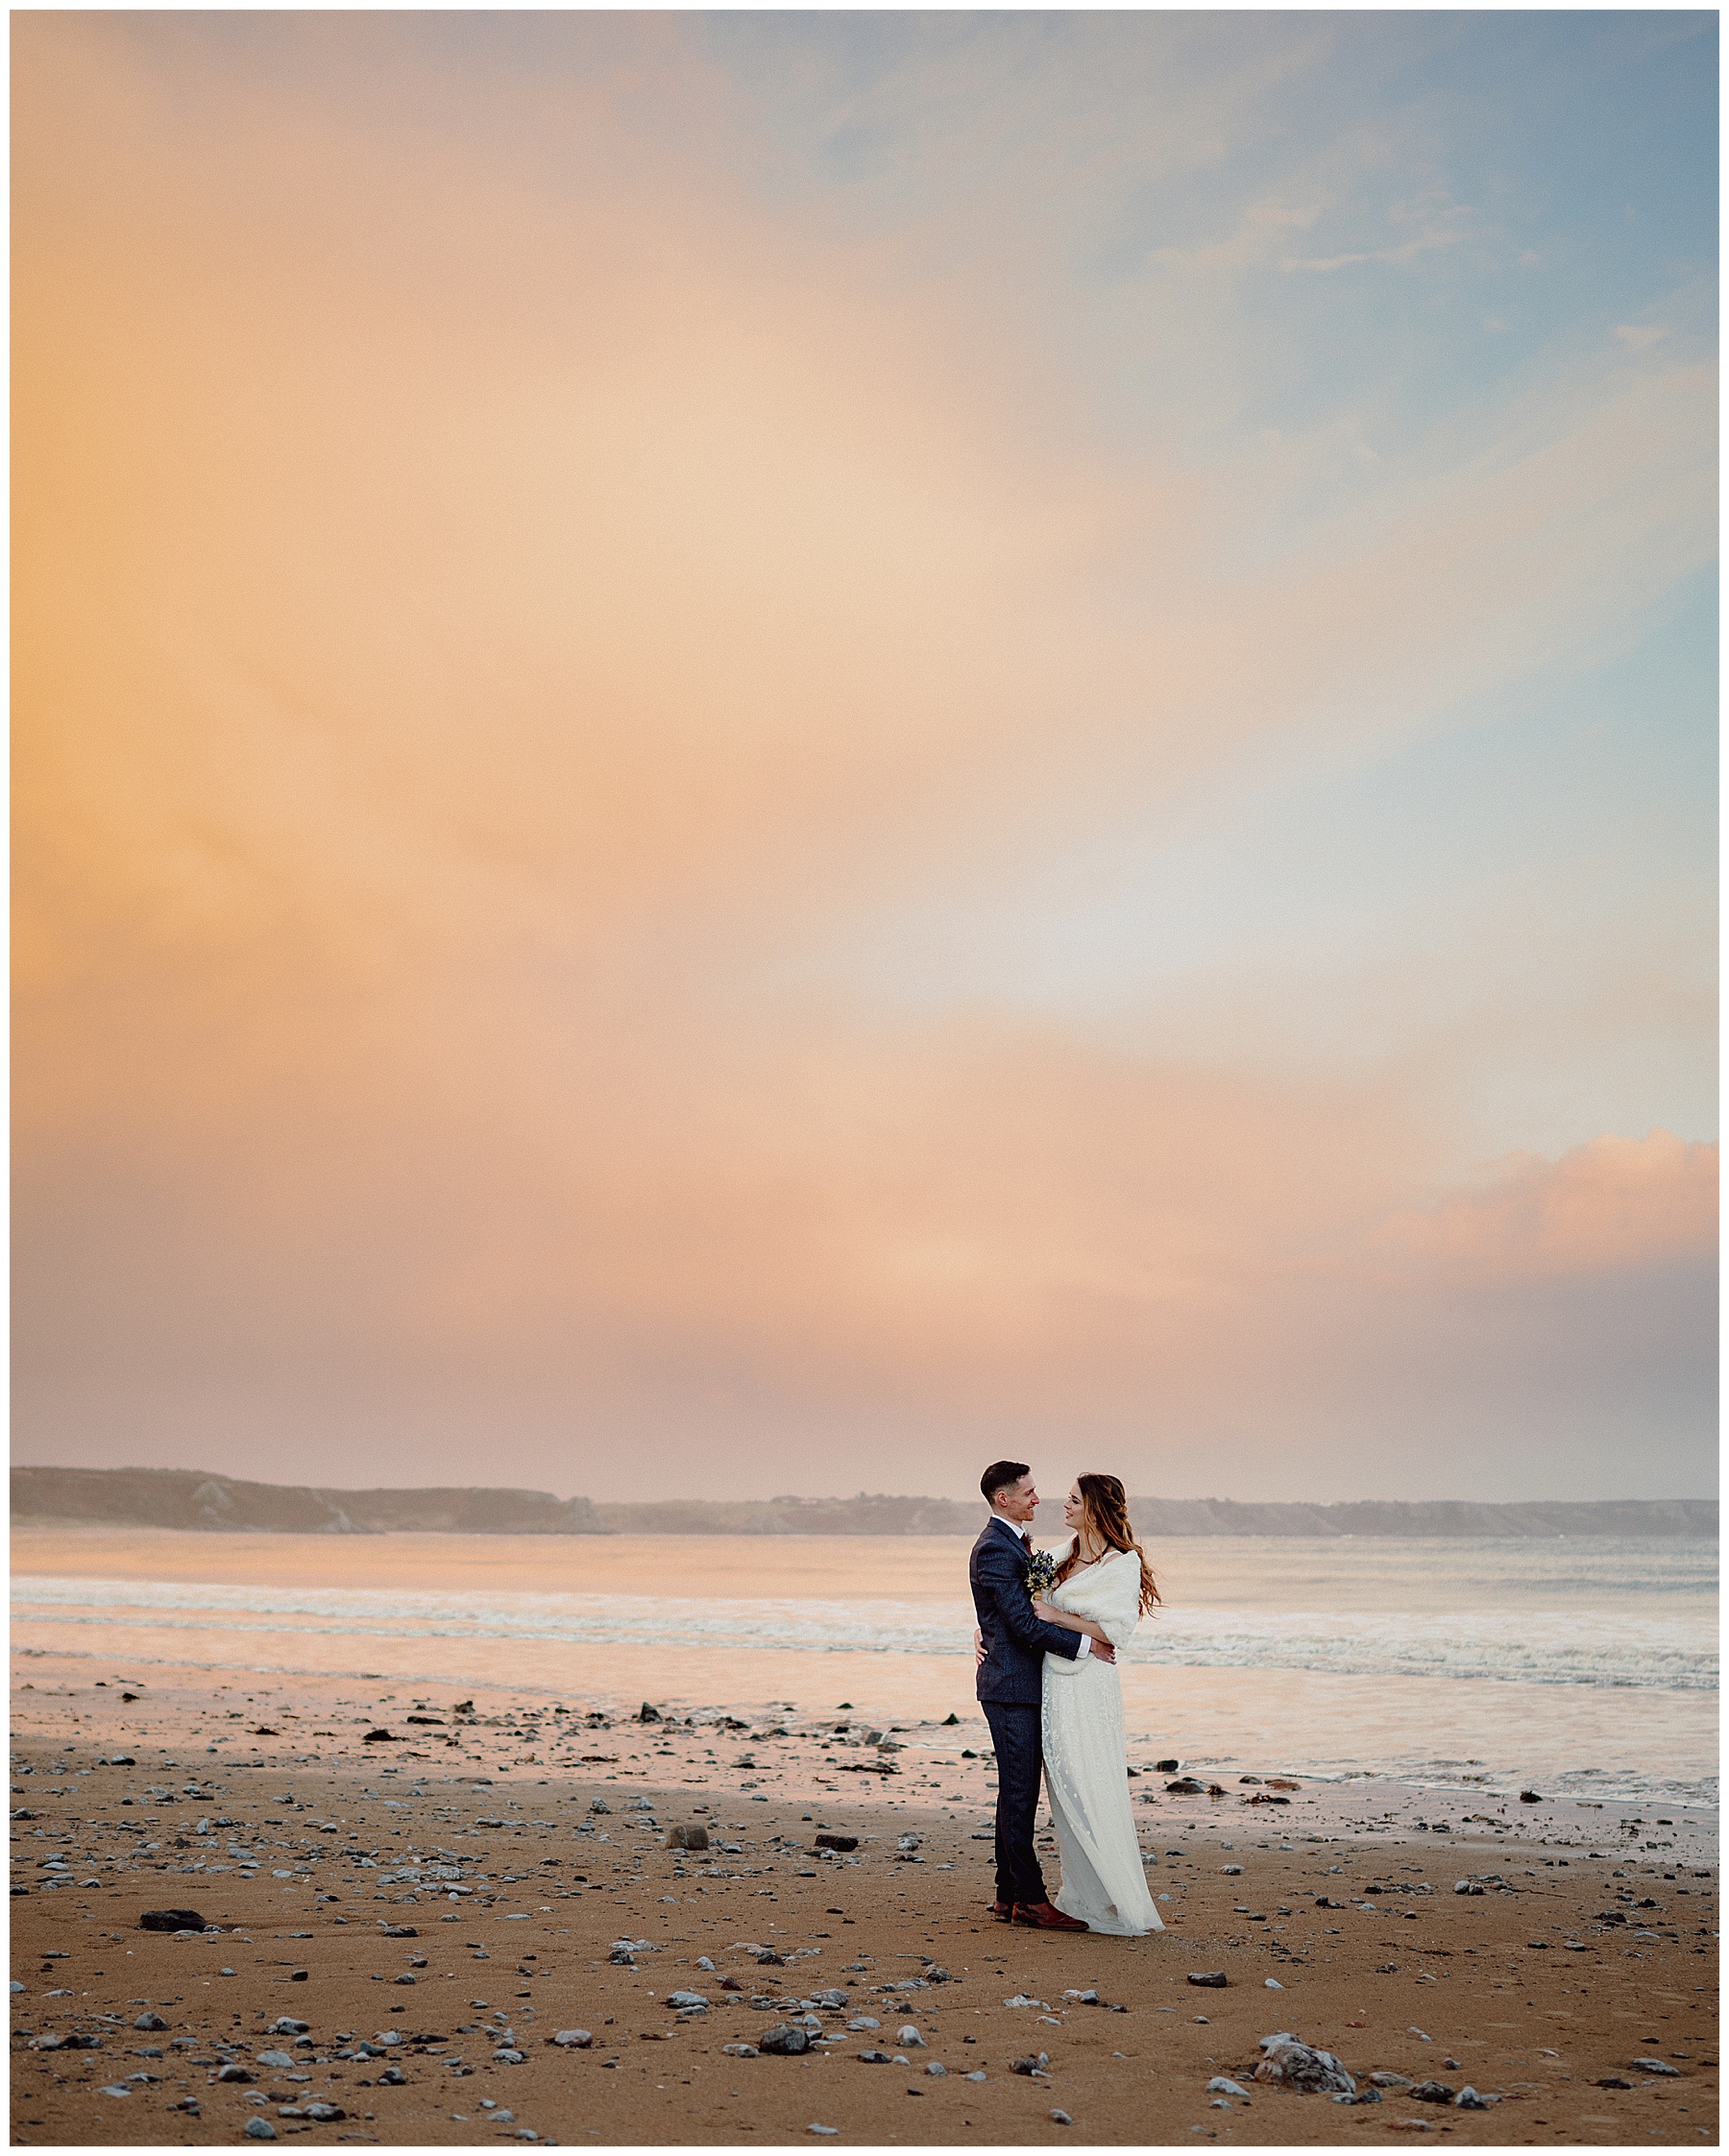 Wedding Sunset Photos at Oxwich Bay